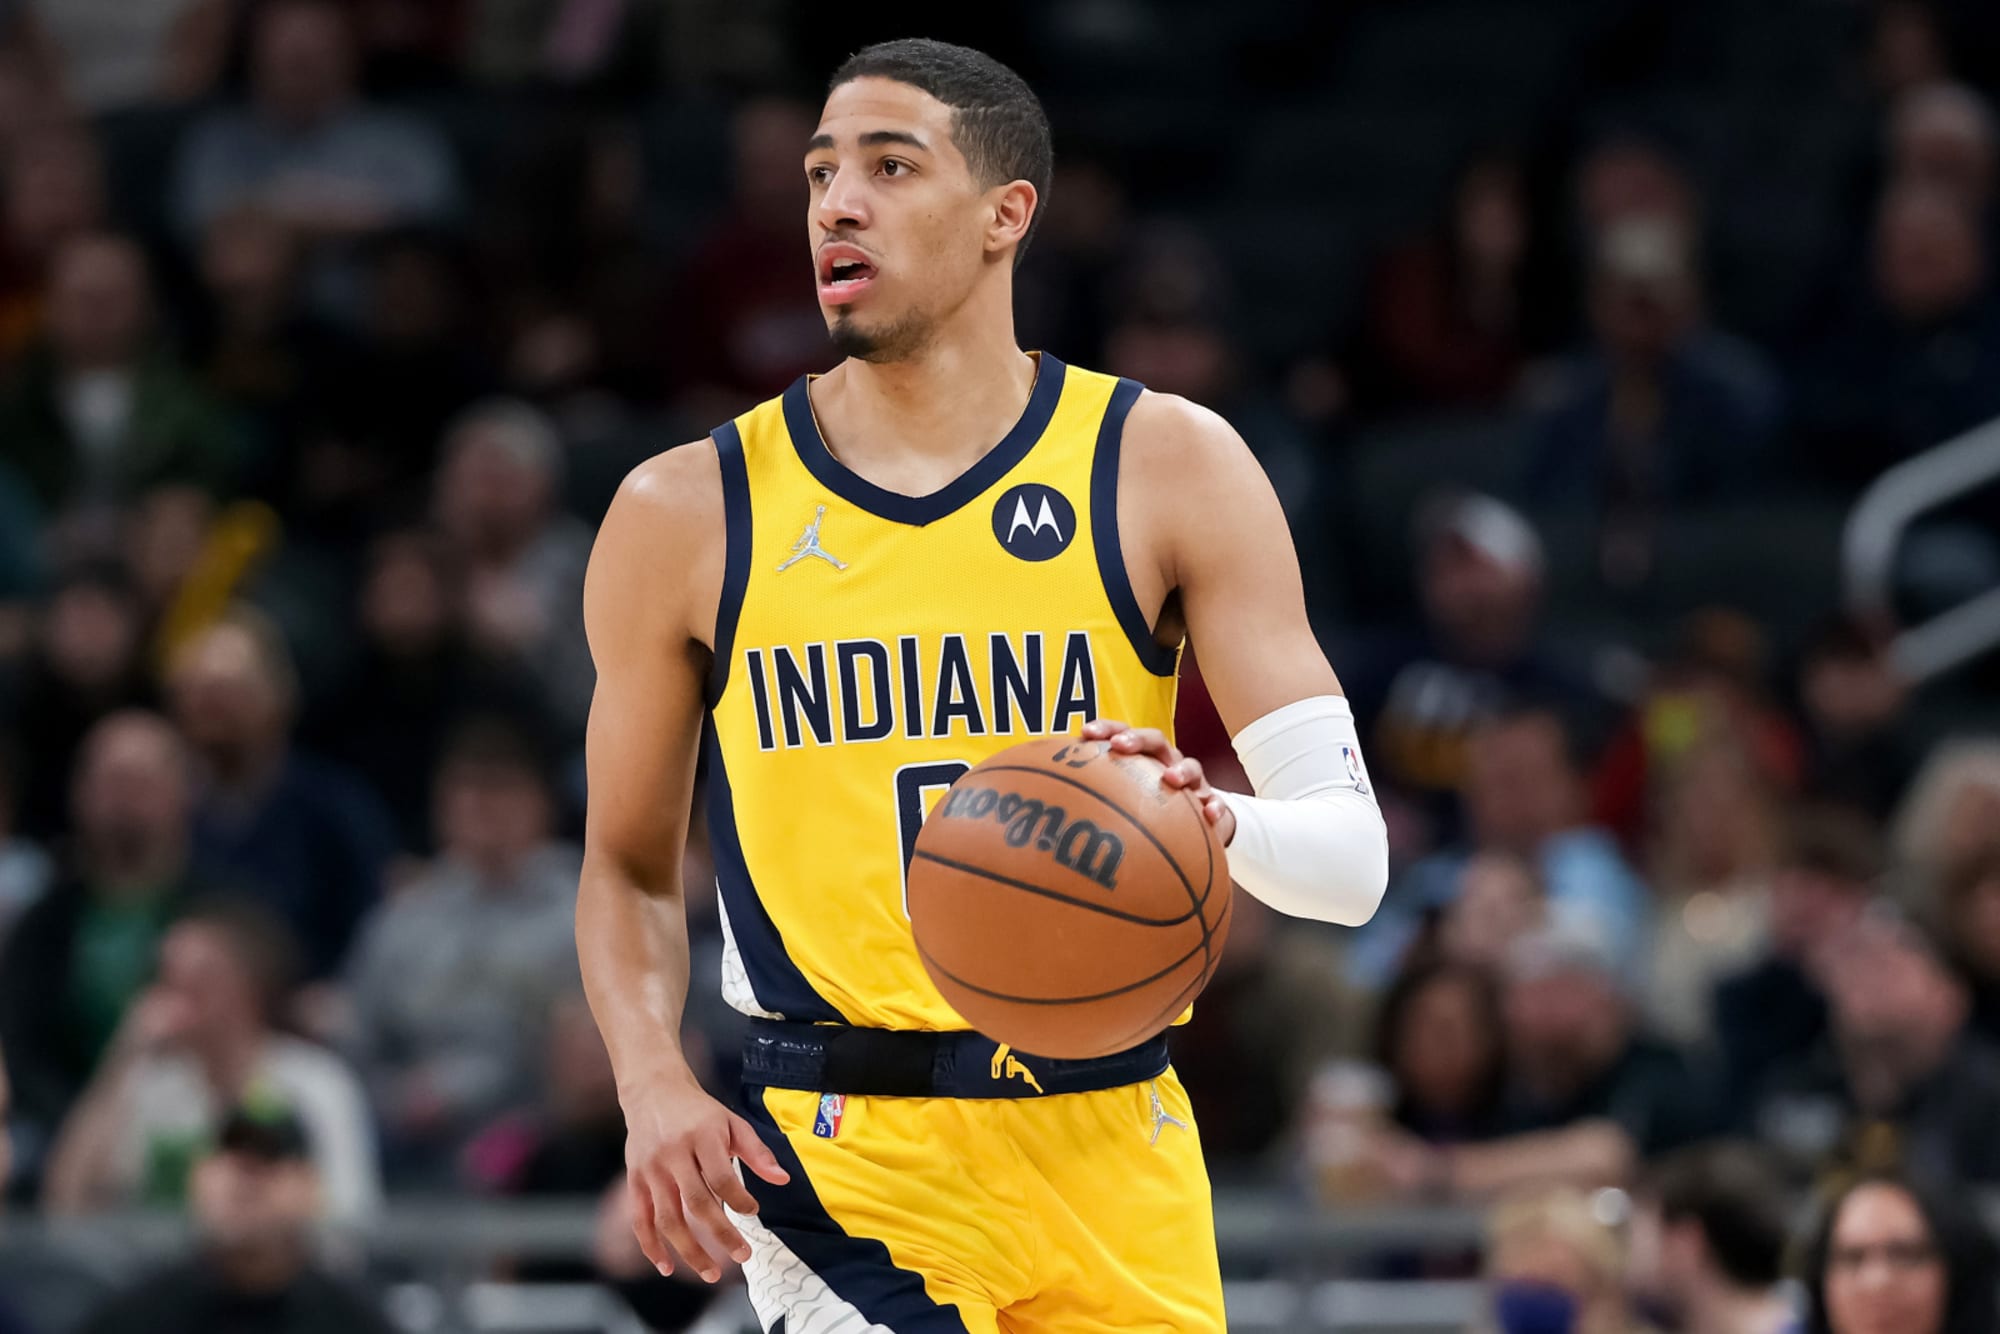 Making his point: The rapid rise of Tyrese Haliburton